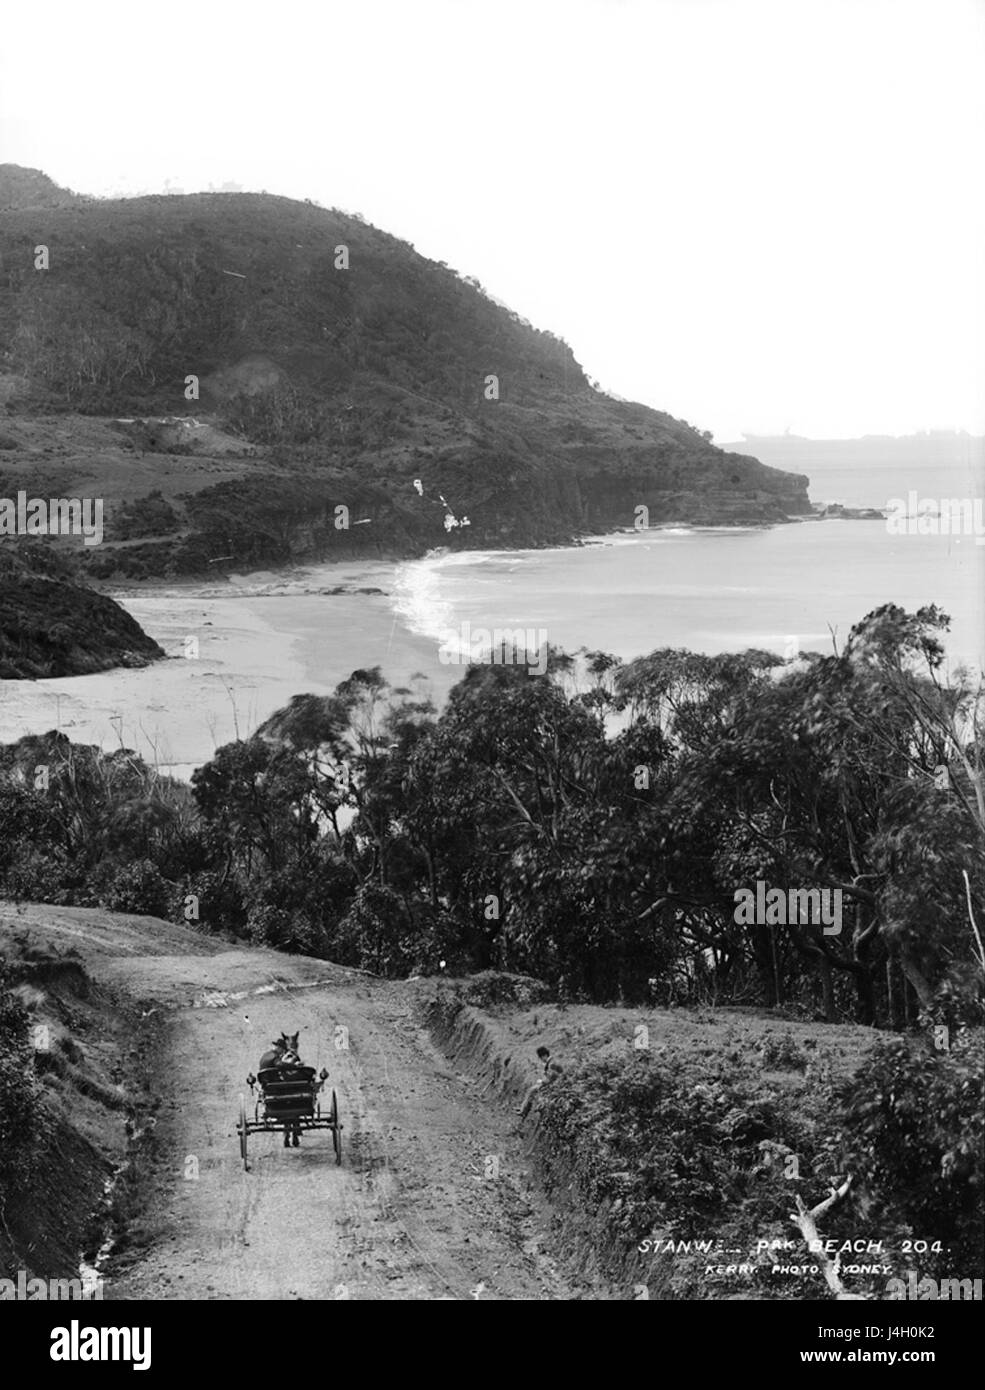 Stanwell Park Beach from The Powerhouse Museum Stock Photo